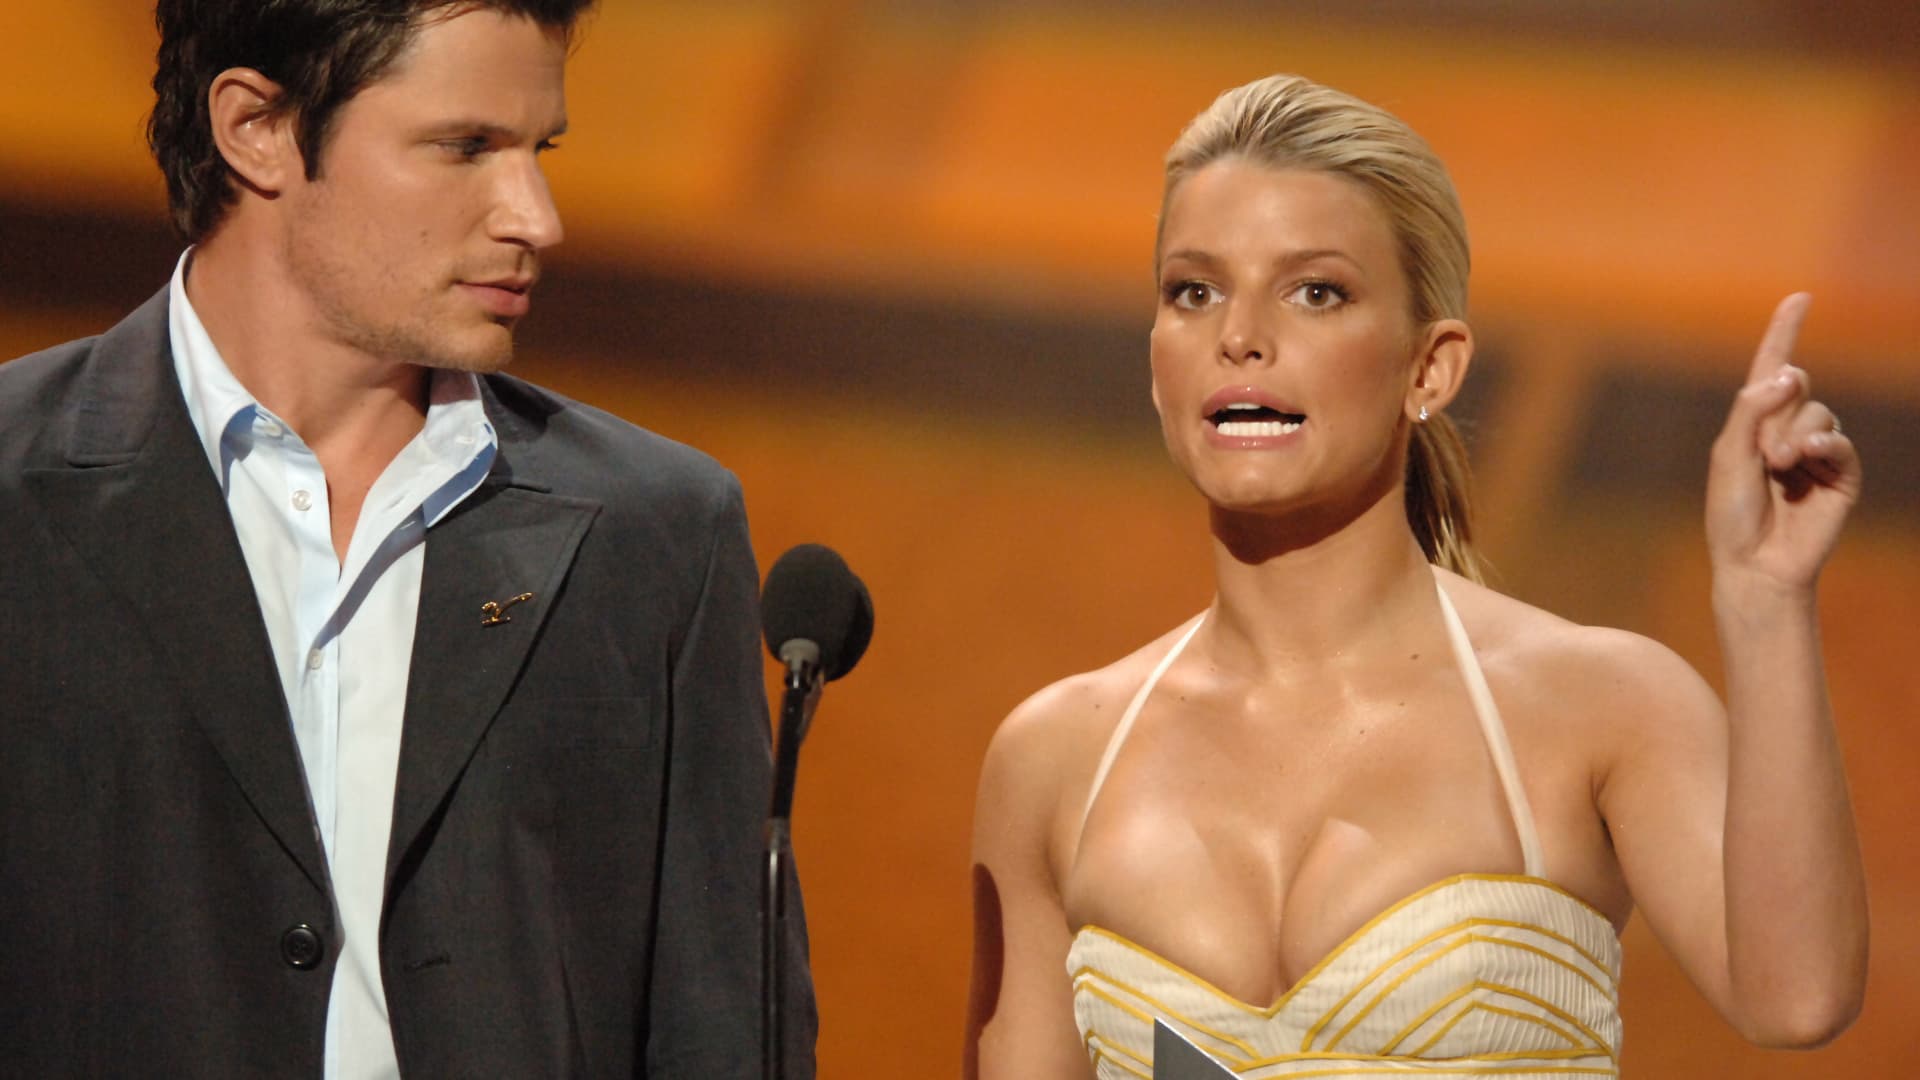 Jessica Simpson wishes she signed a prenup before marrying Nick Lachey